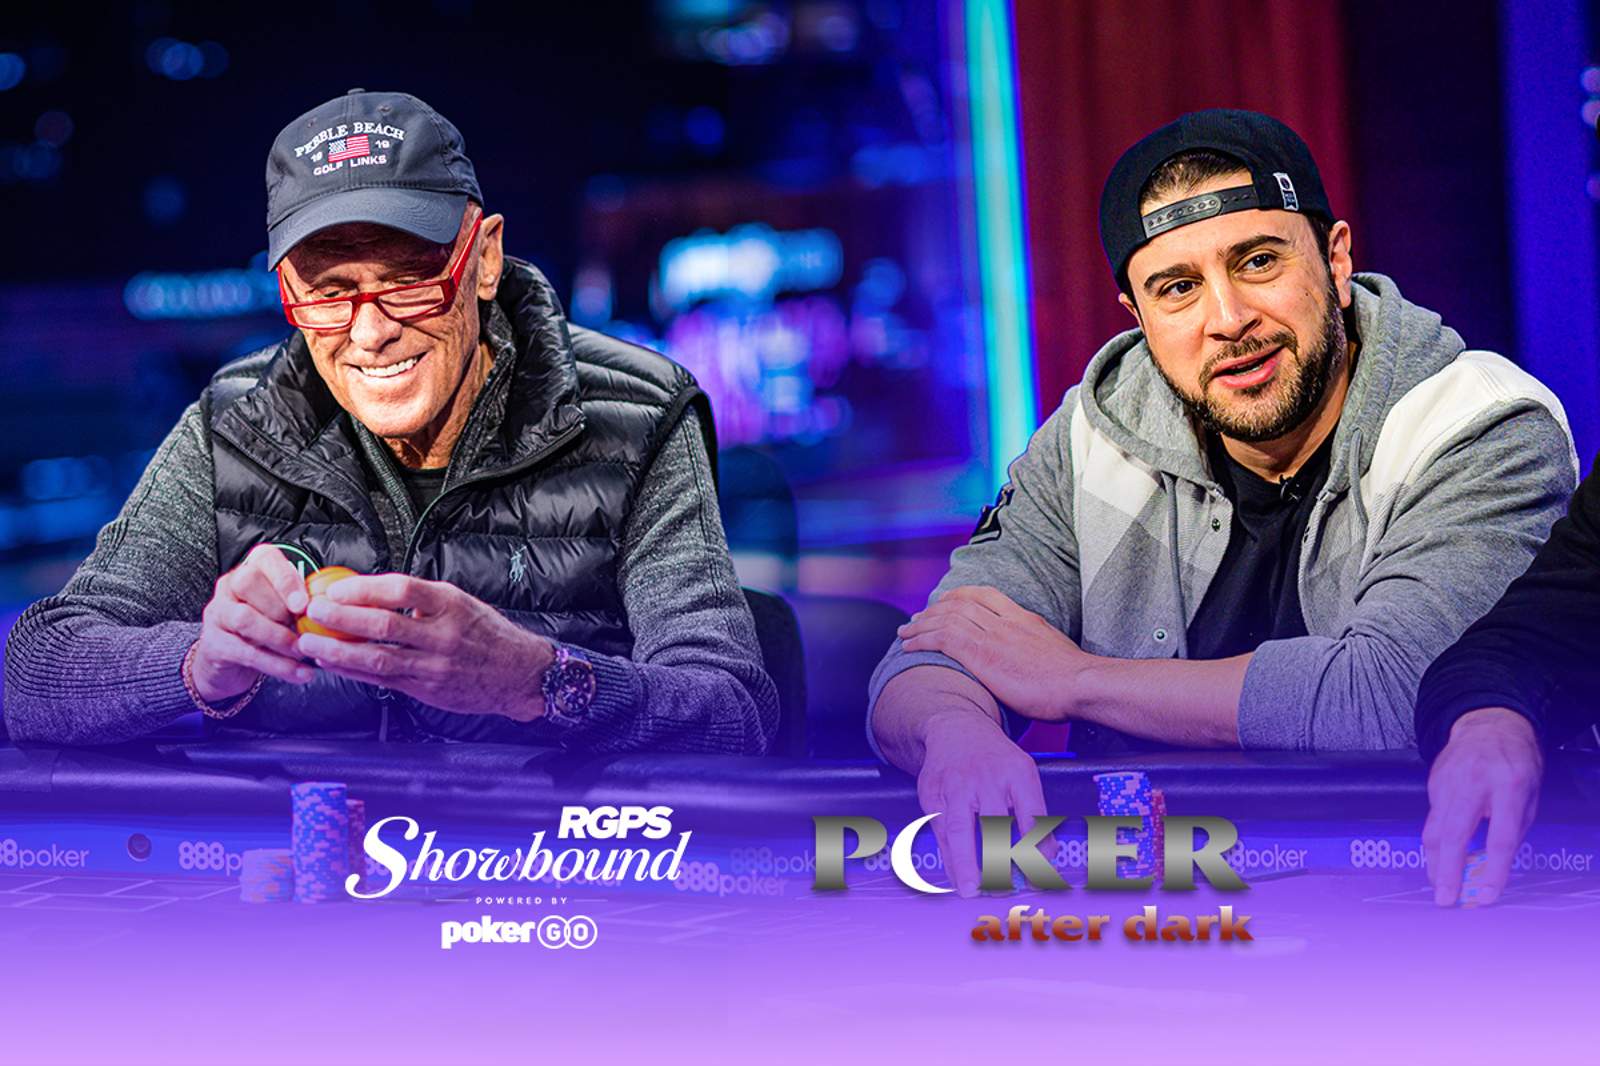 RUNGOOD Poker Series Makes Dreams Come True on Poker After Dark